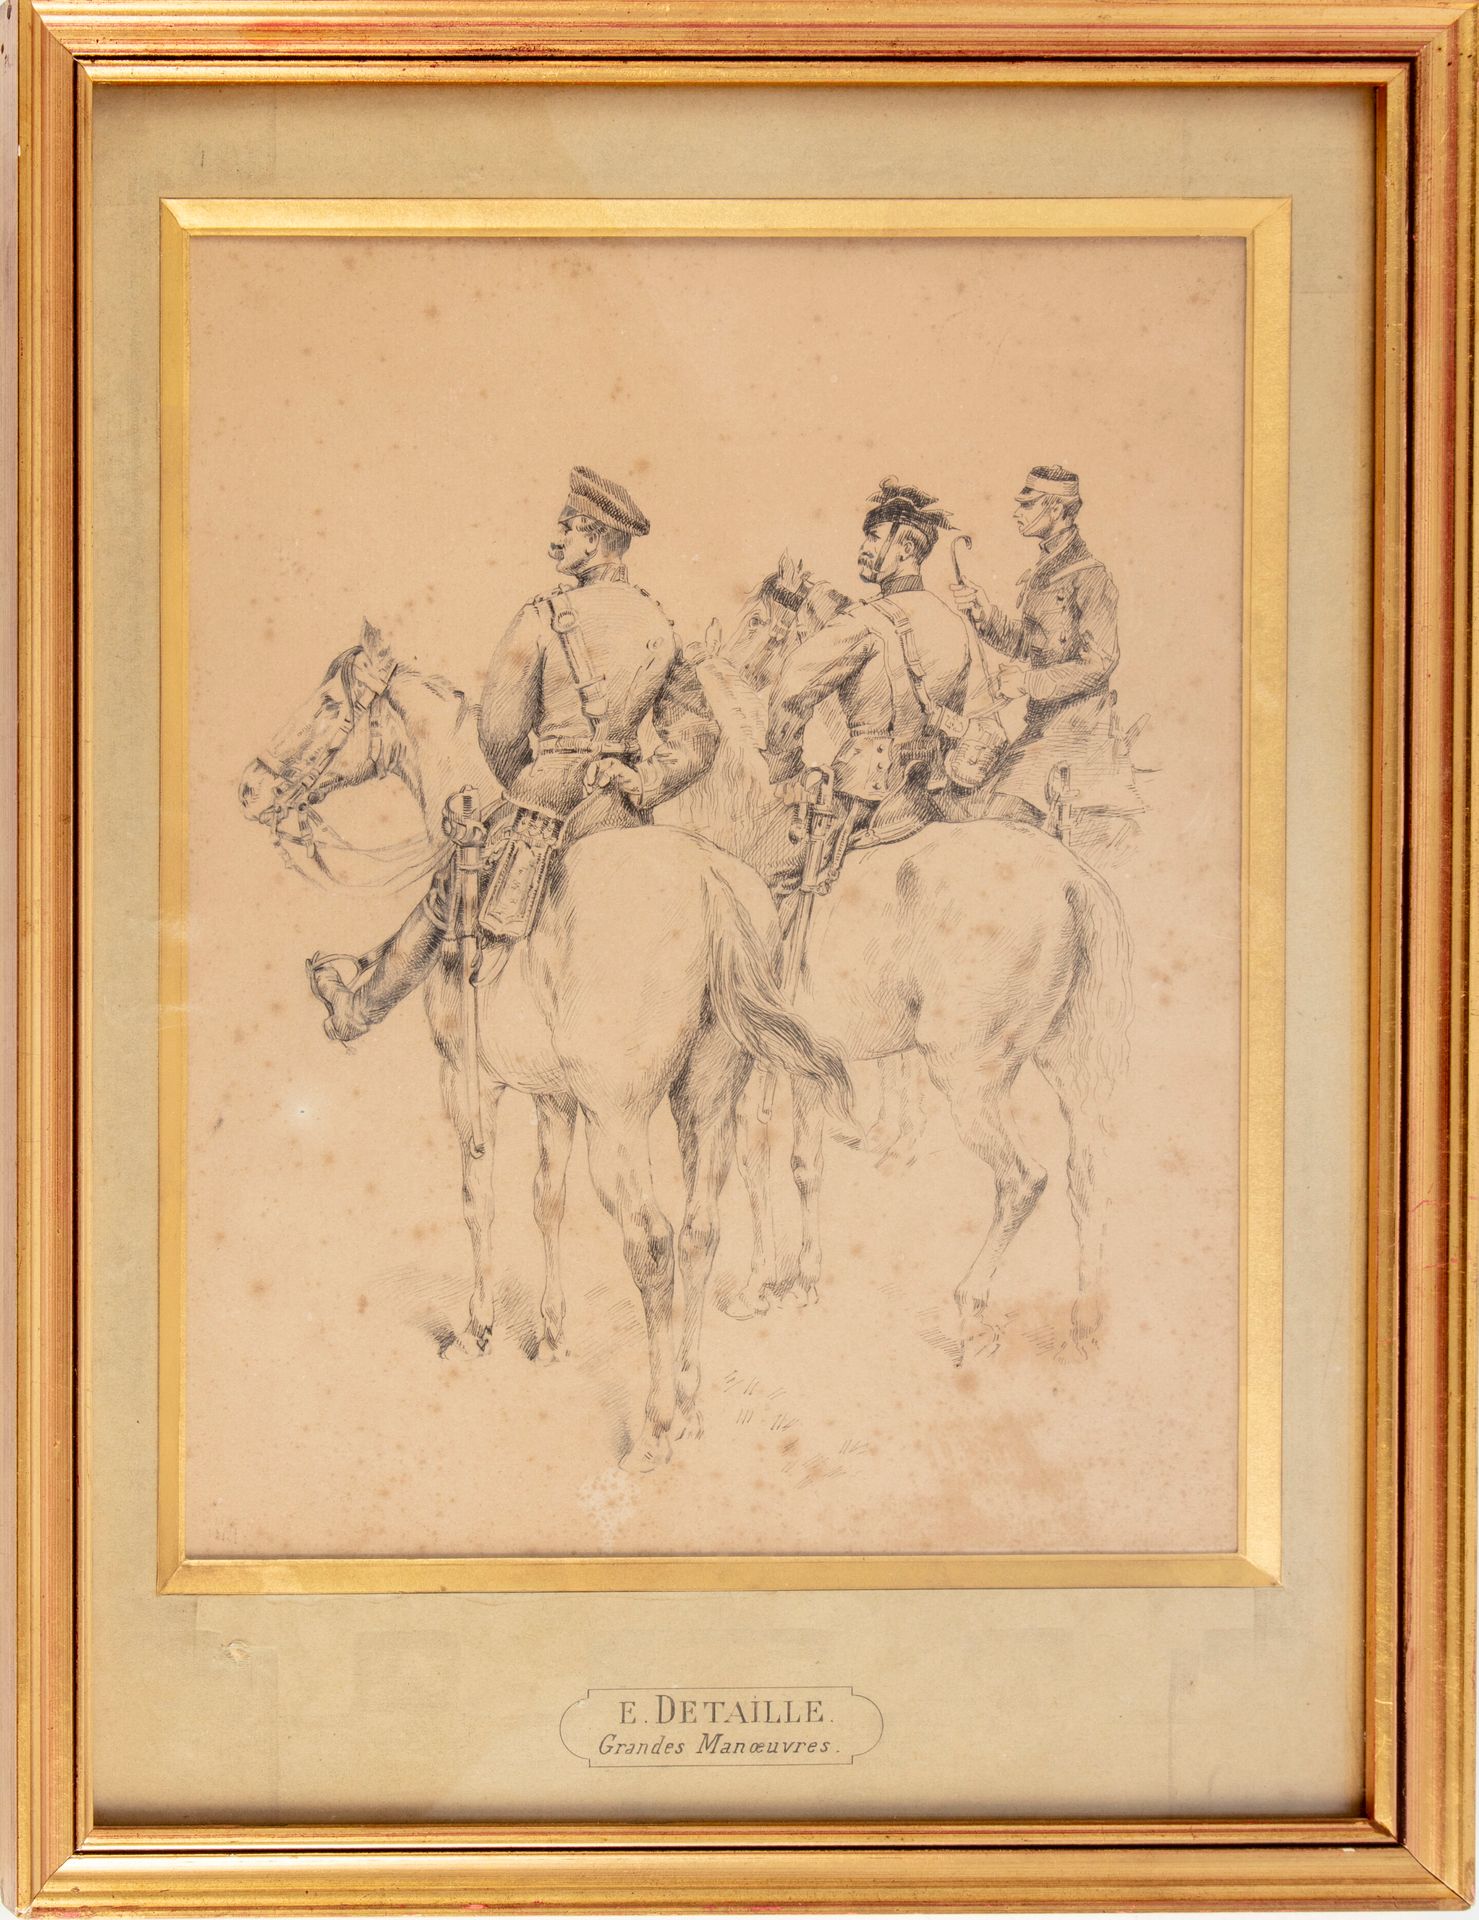 DETAILLE Edouard DETAILLE (1848-1912)

Great Maneuvers

Drawing in ink

29 x 24 &hellip;